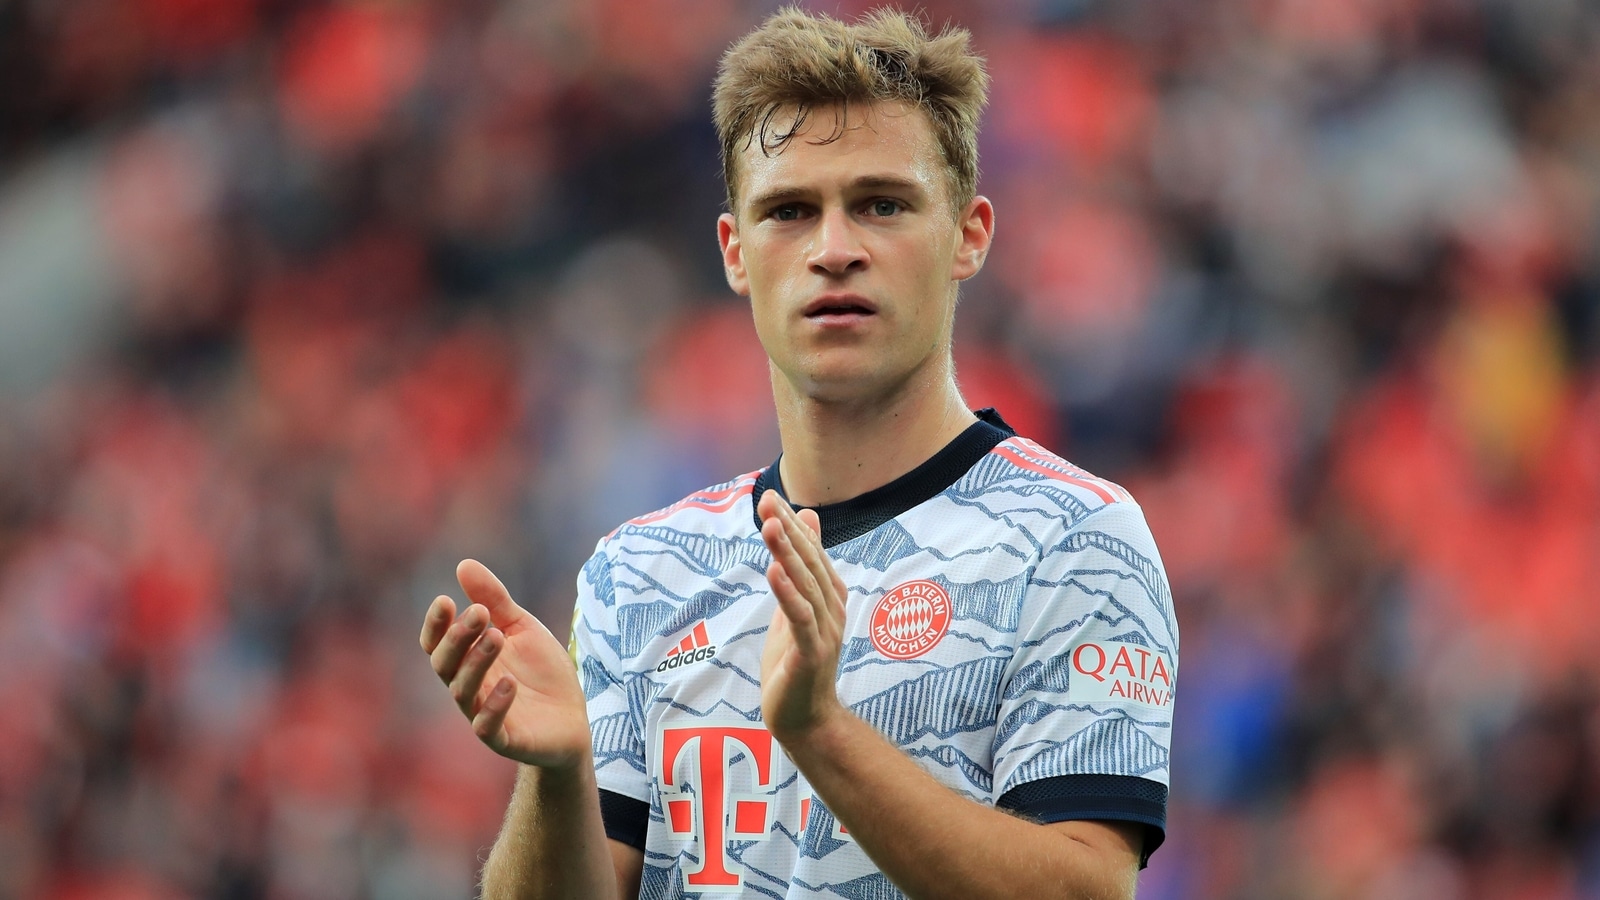 Barcelona Transfer News: Club keen to sign a defensive midfielder and two full-backs next summer